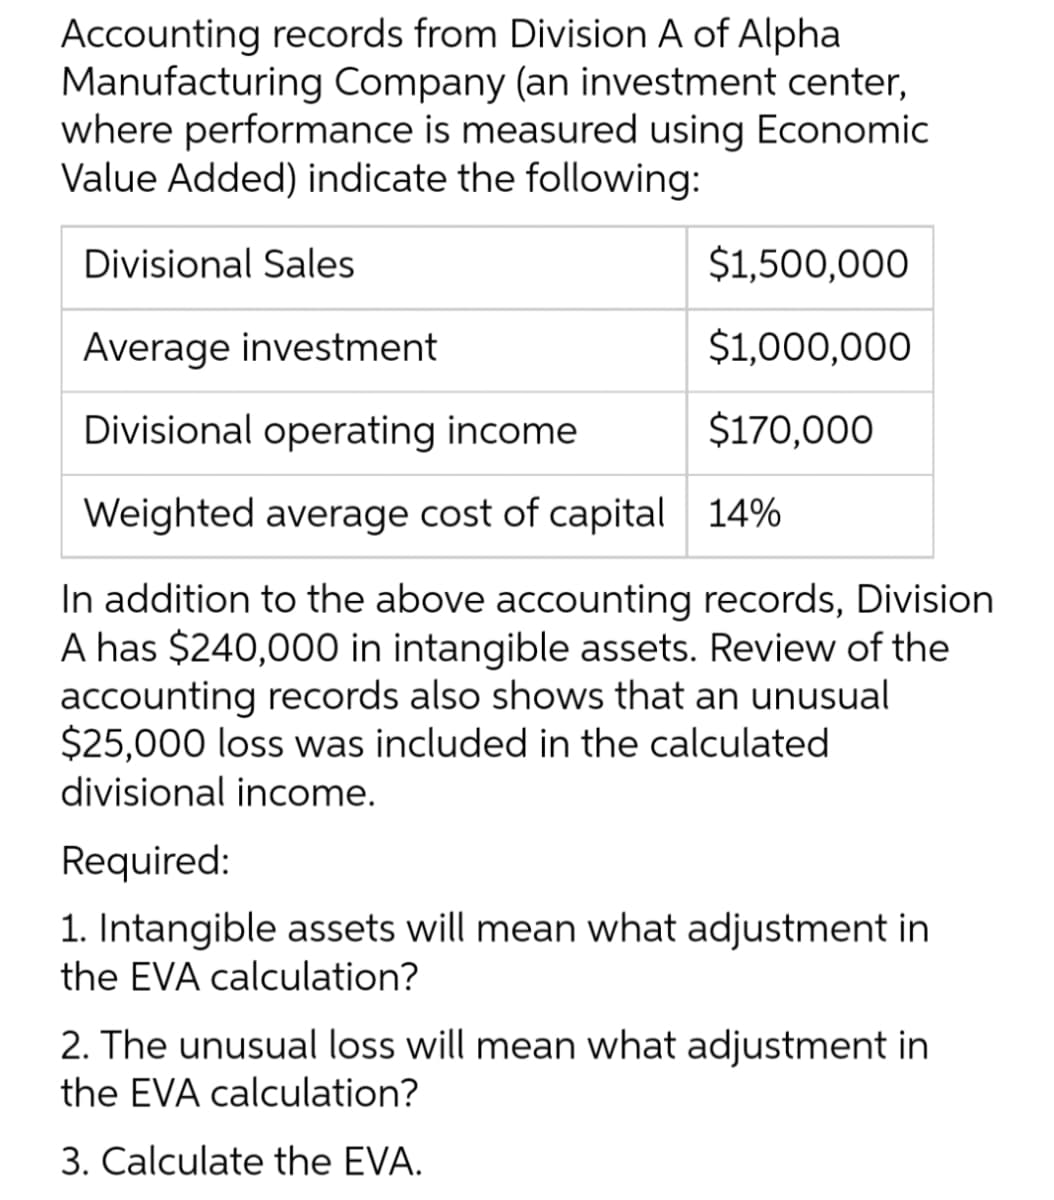 Accounting records from Division A of Alpha
Manufacturing Company (an investment center,
where performance is measured using Economic
Value Added) indicate the following:
Divisional Sales
$1,500,000
Average investment
$1,000,000
Divisional operating income
$170,000
Weighted average cost of capital 14%
In addition to the above accounting records, Division
A has $240,000 in intangible assets. Review of the
accounting records also shows that an unusual
$25,000 loss was included in the calculated
divisional income.
Required:
1. Intangible assets will mean what adjustment in
the EVA calculation?
2. The unusual loss will mean what adjustment in
the EVA calculation?
3. Calculate the EVA.
